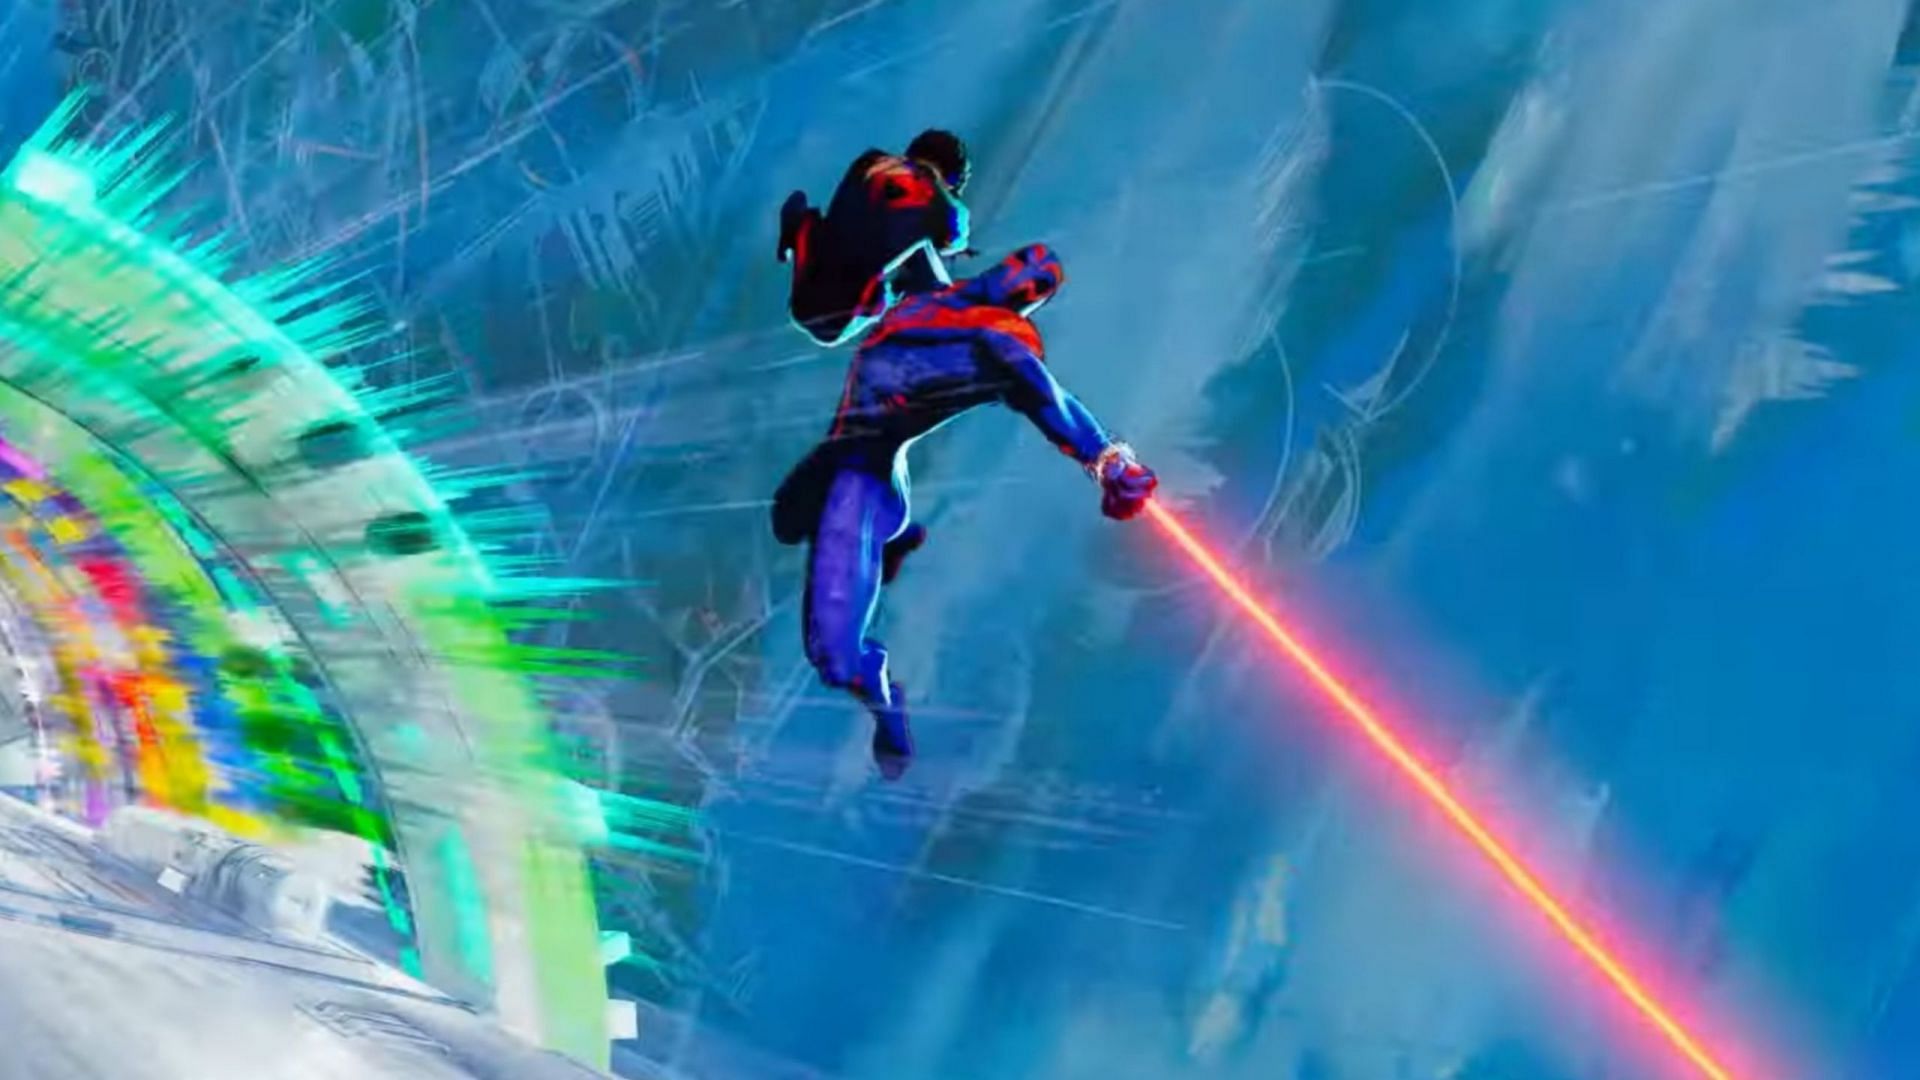 Spider-Man 2099 vs Miles Morales in Spider-Man: Across the Spider-Verse (image via Sony Pictures Entertainment)